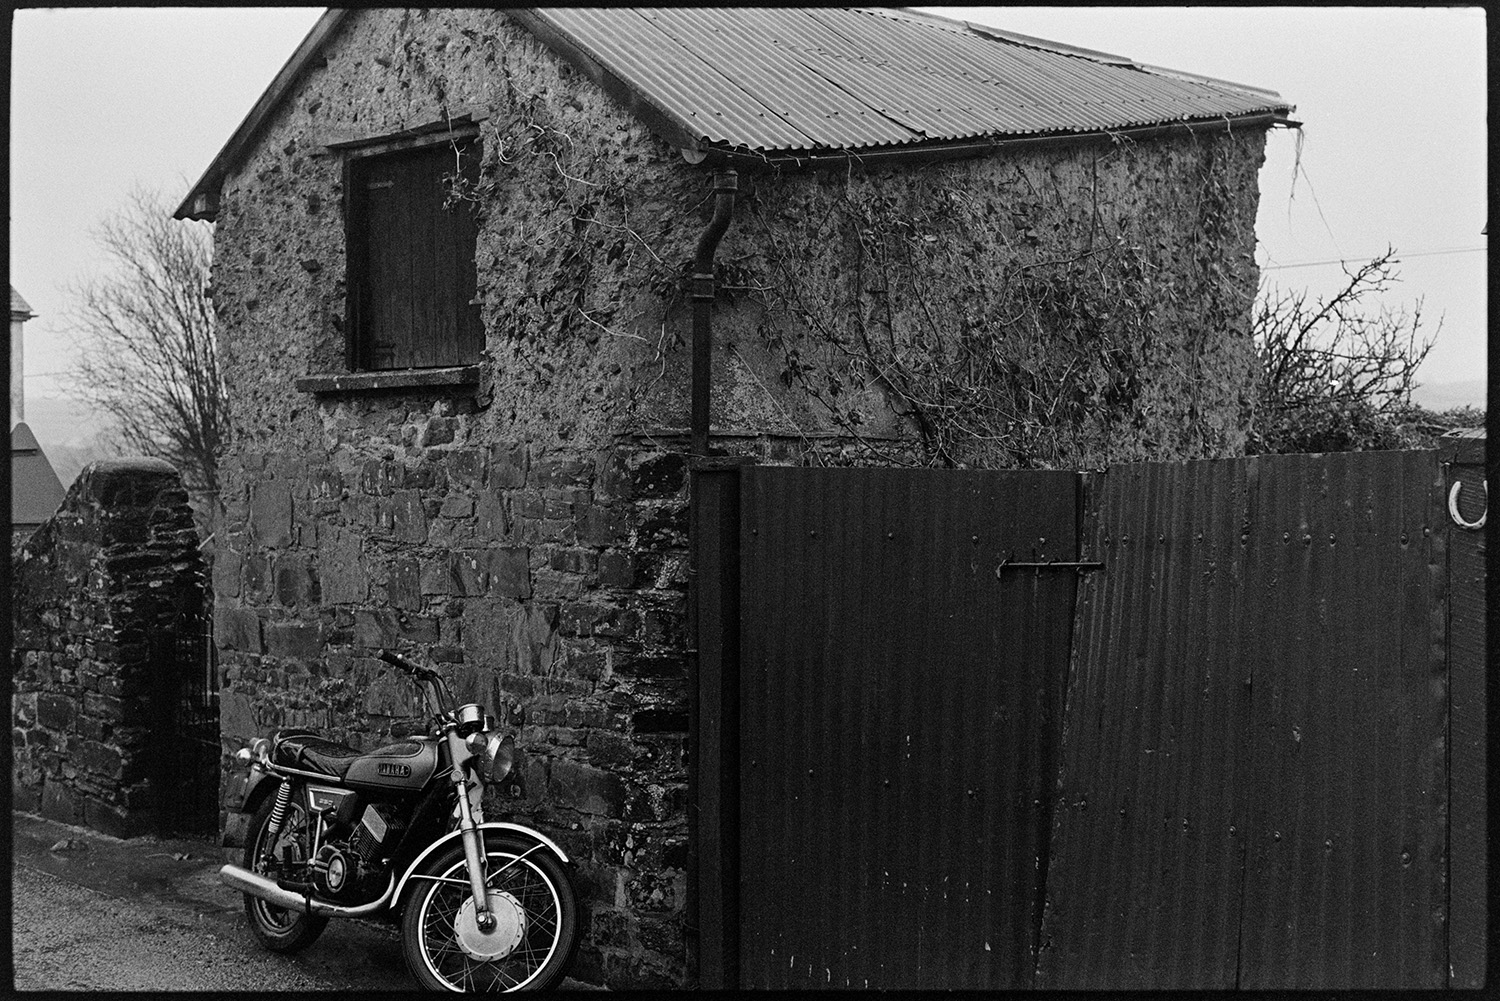 Motorbike parked beside barn shed made of cob with tallet. 
[A motorcycle parked outside a stone and cob barn with a corrugated iron roof in Aller Road, Dolton. A wooden door to the barn tallet is also visible.]